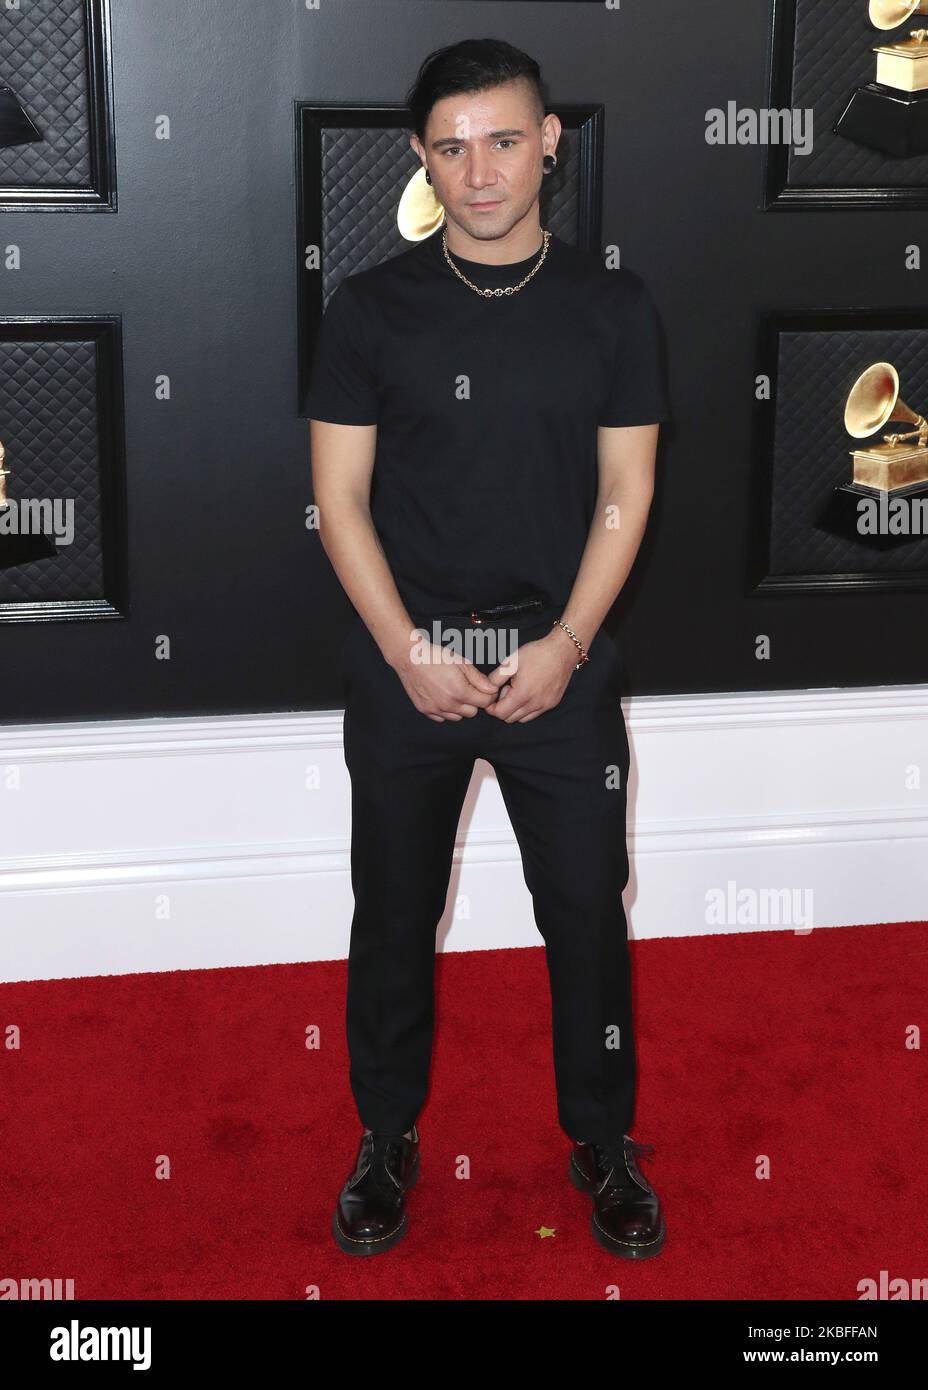 LOS ANGELES, CALIFORNIA, USA - JANUARY 26: Skrillex arrives at the 62nd Annual GRAMMY Awards held at Staples Center on January 26, 2020 in Los Angeles, California, United States. (Photo by Xavier Collin/Image Press Agency/NurPhoto) Stock Photo